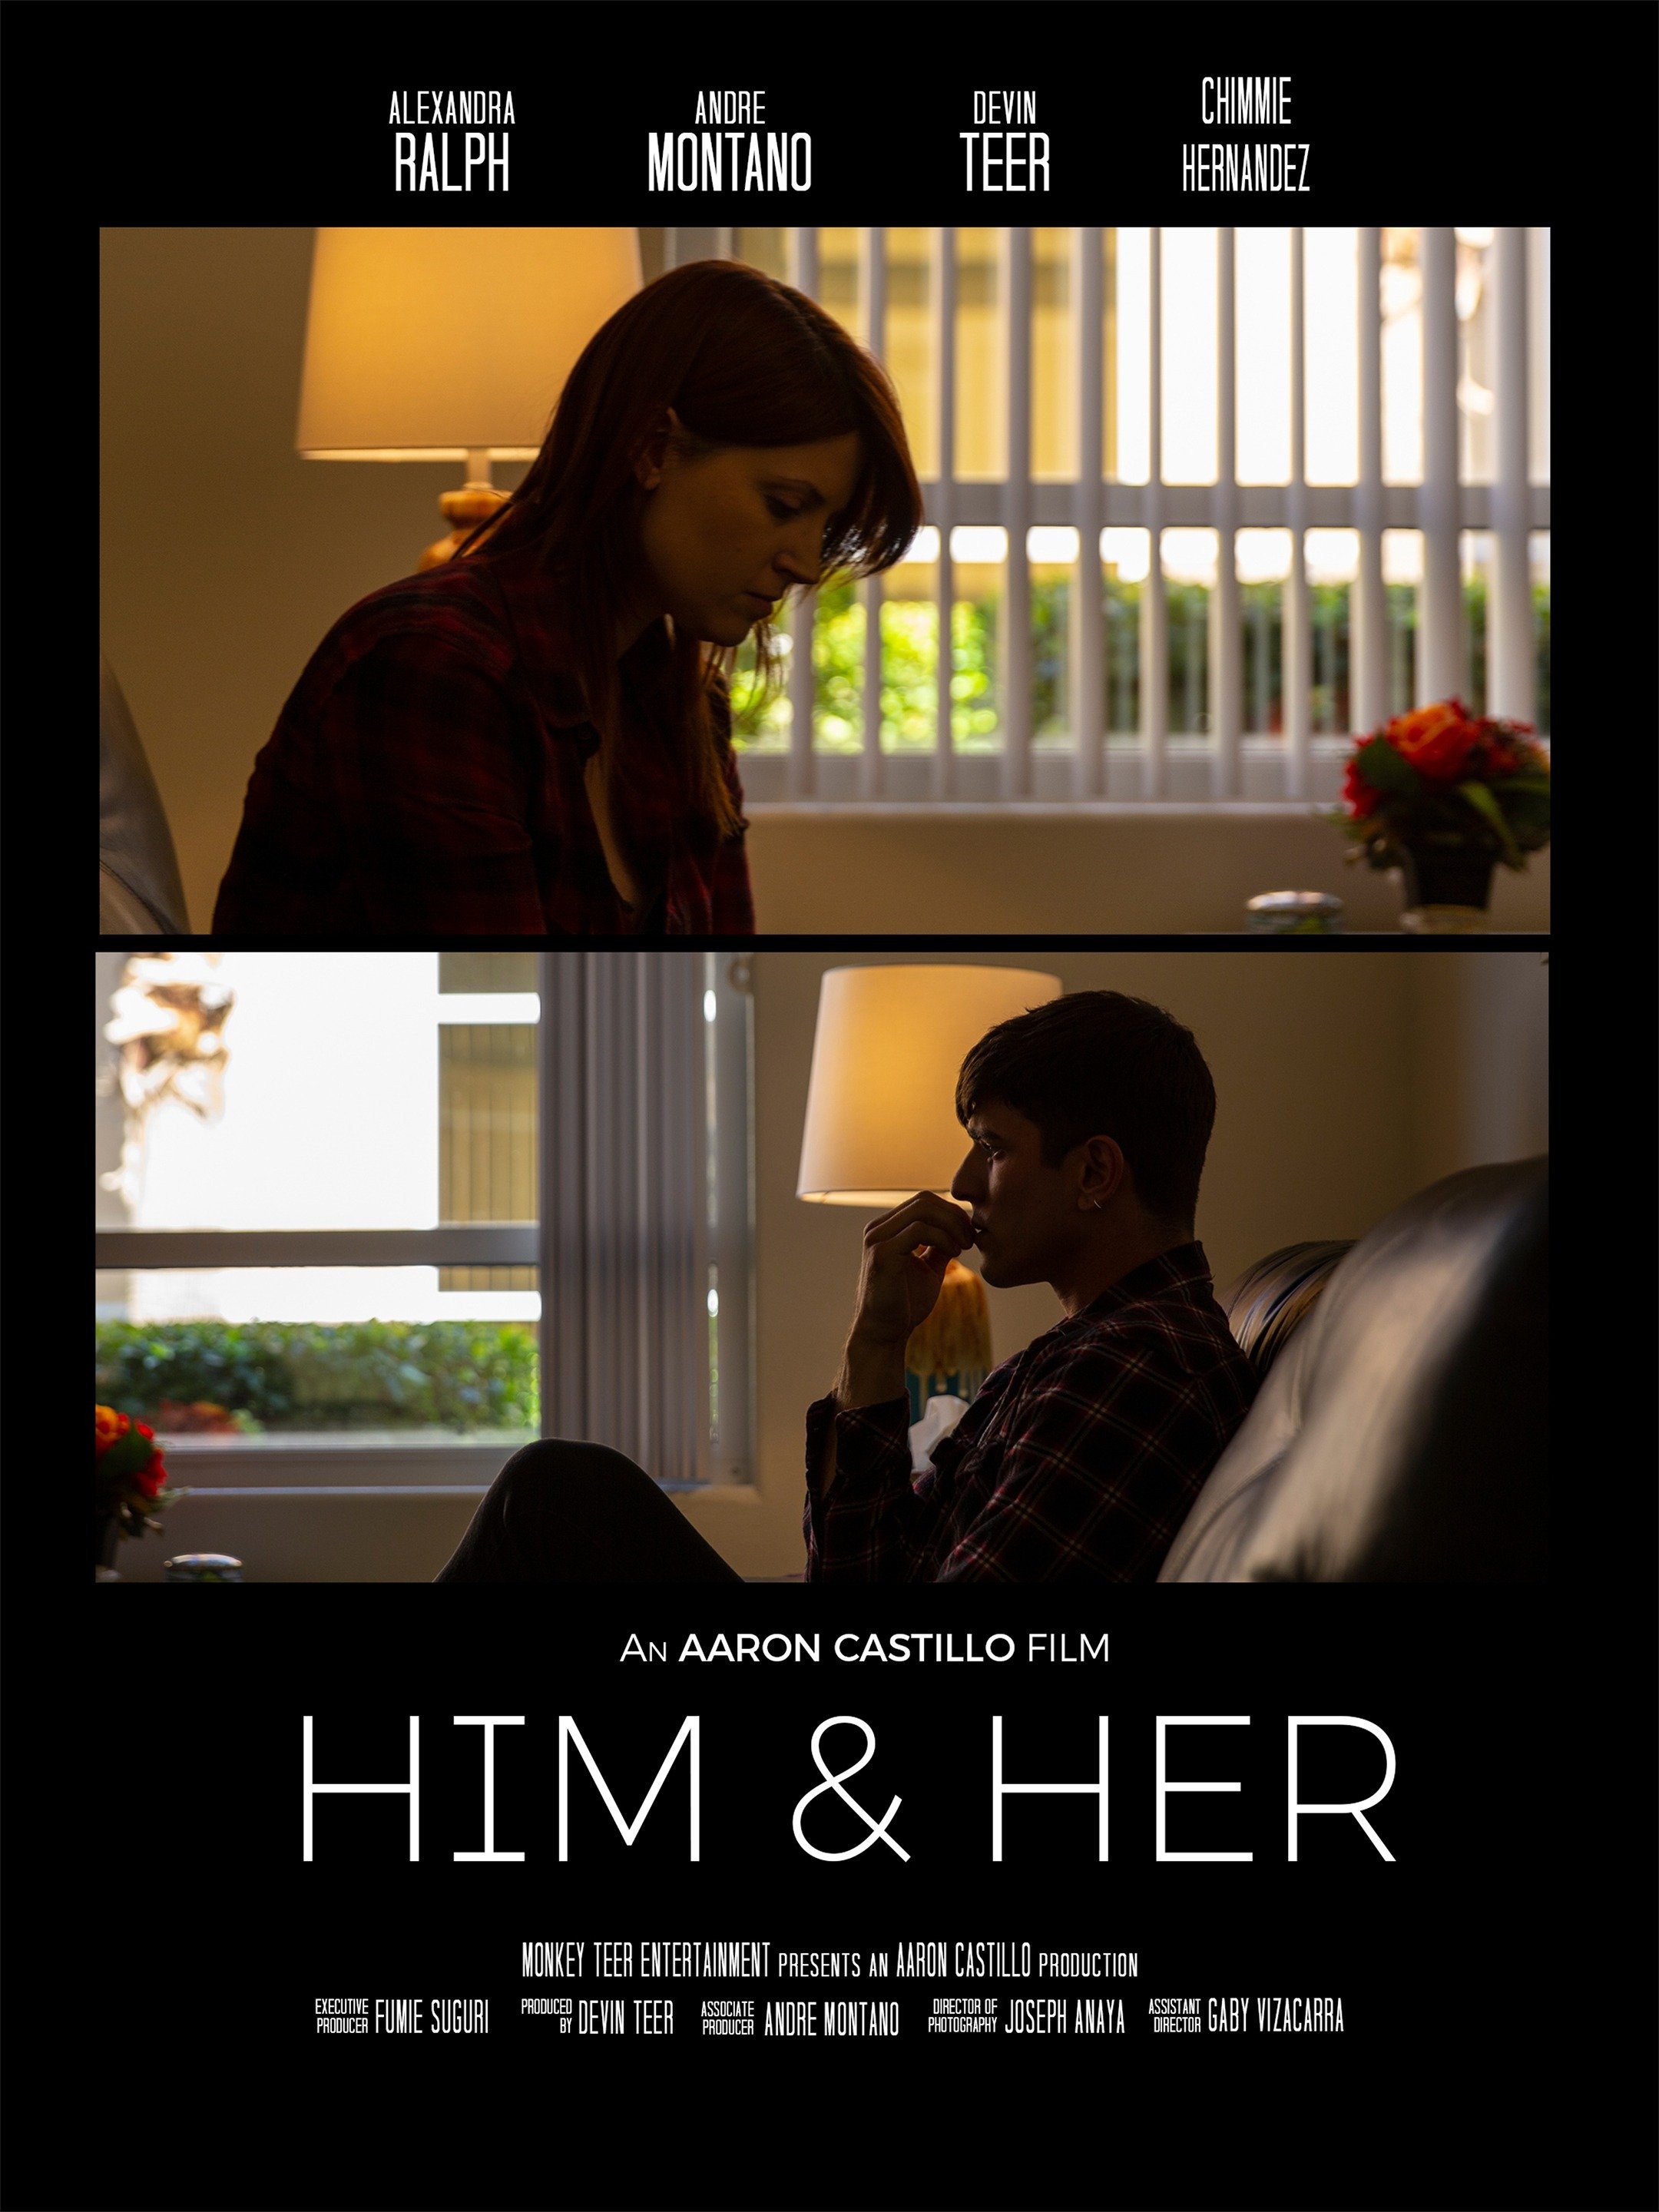 He save her. Her & him 2019. He movie.